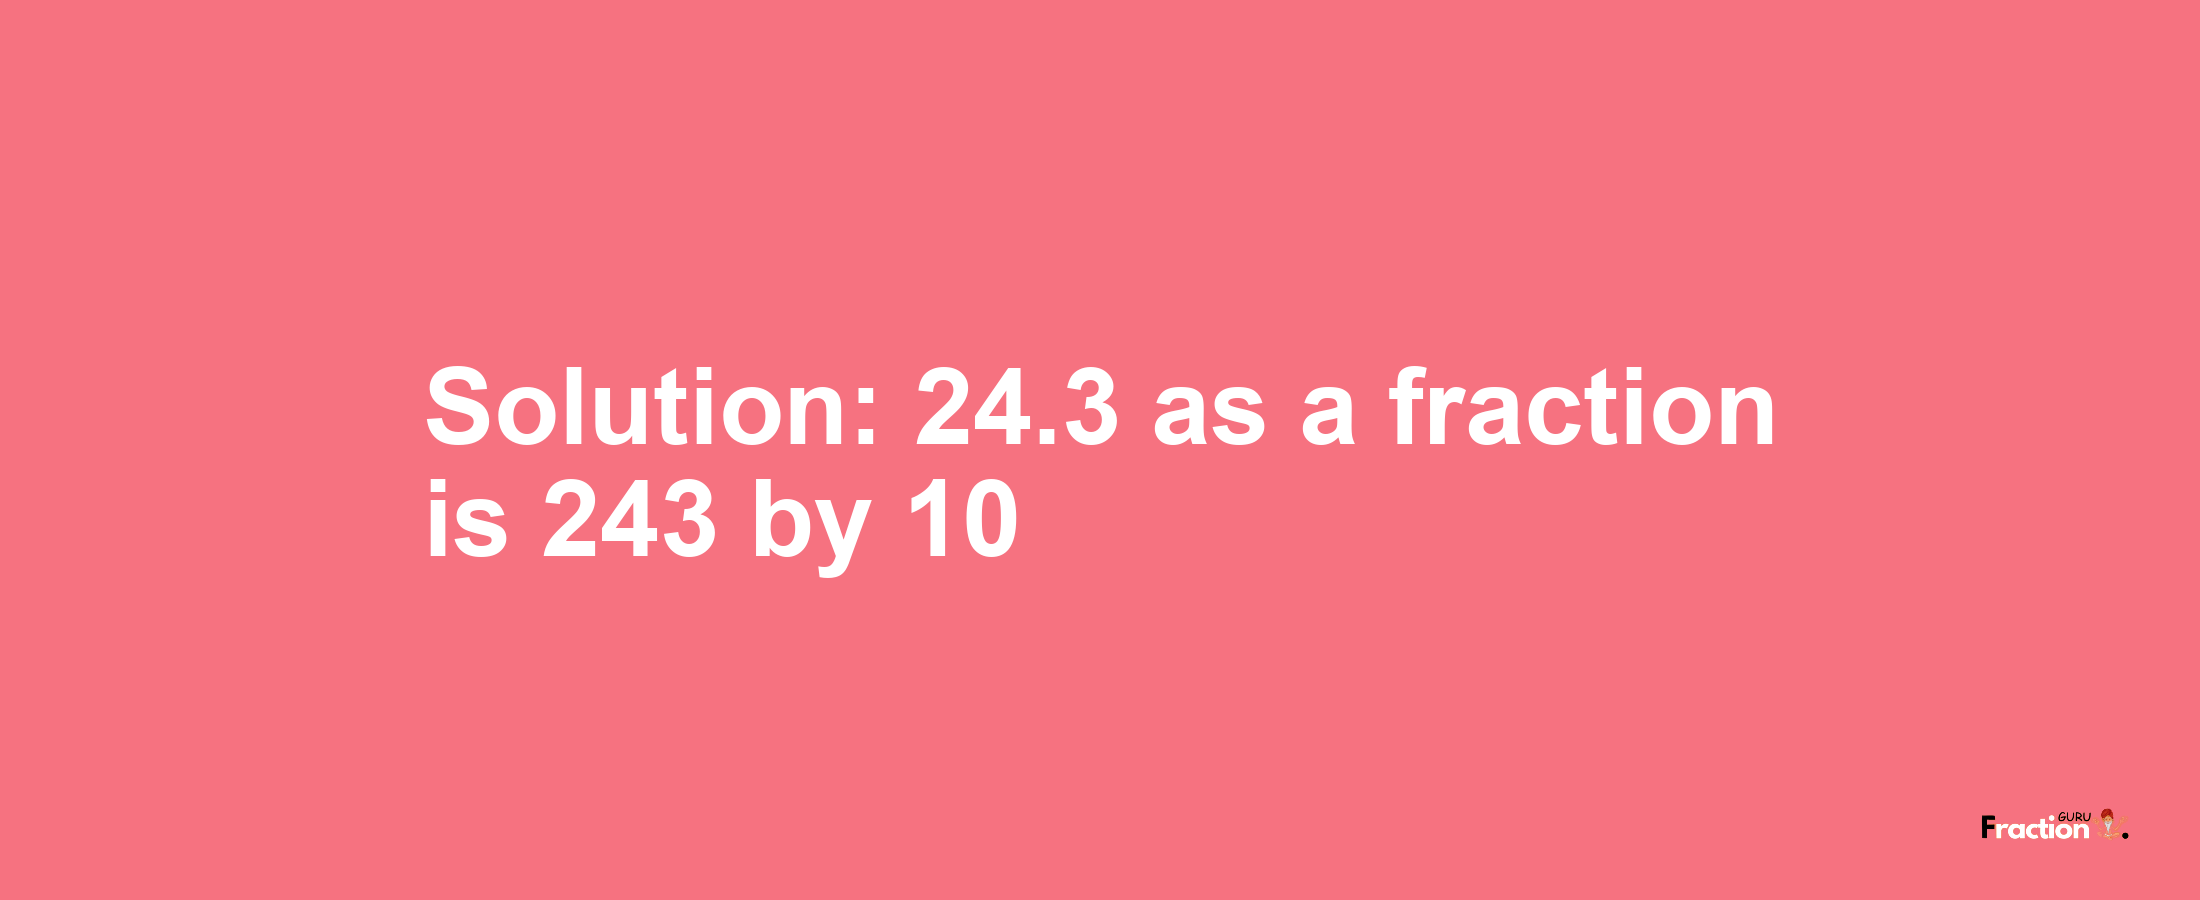 Solution:24.3 as a fraction is 243/10